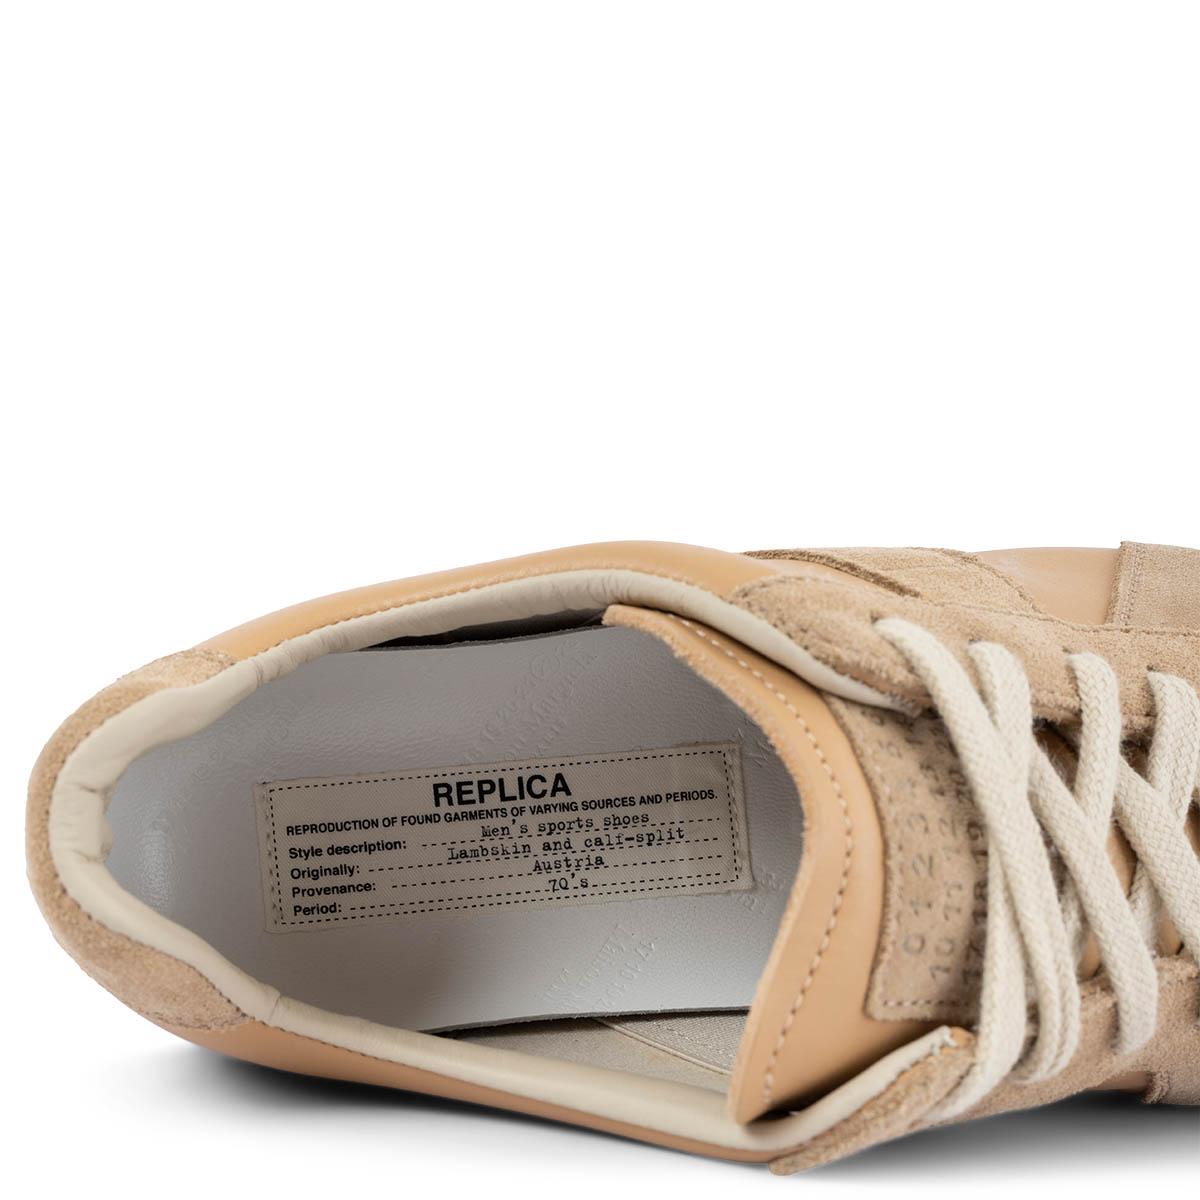 MAISON MARGIELA beige leather & suede REPLICA LOW TOP Sneakers Shoes 38 For Sale 2